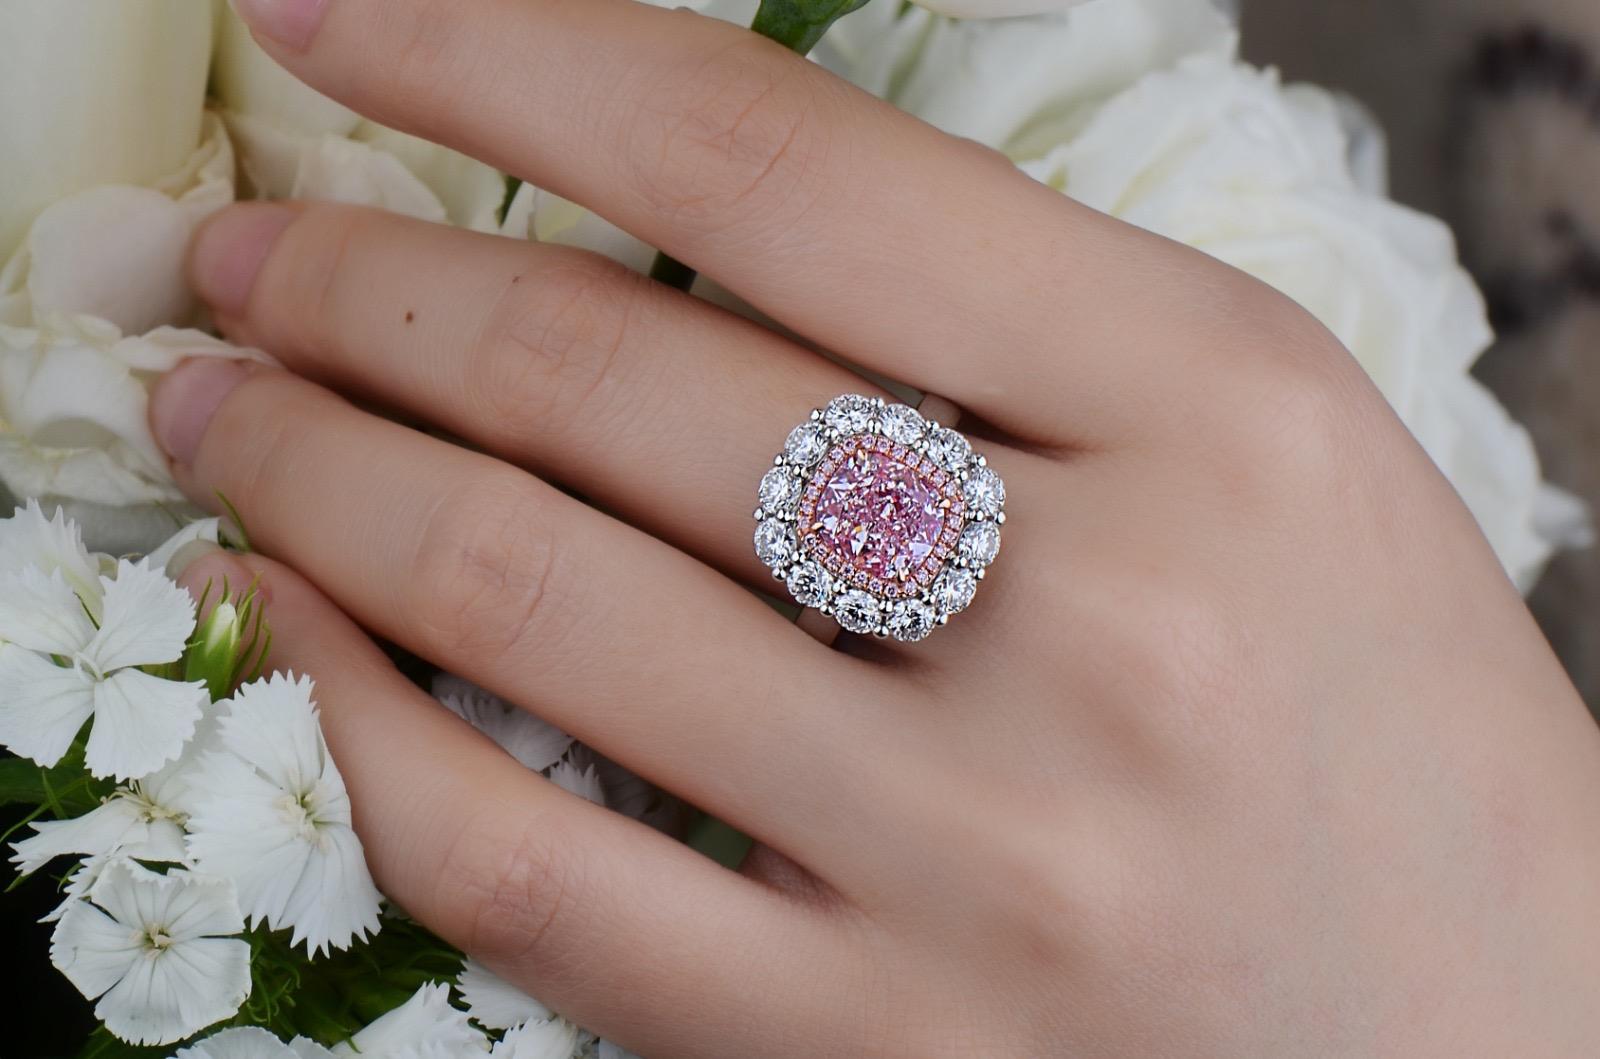 From the Emilio Jewelry Museum Vault, Showcasing a magnificent investment grade 3.00 carat Gia certified natural fancy light pure pink diamond center stone. With Emilio's expertise after setting the center faces up with a visual of fancy intense